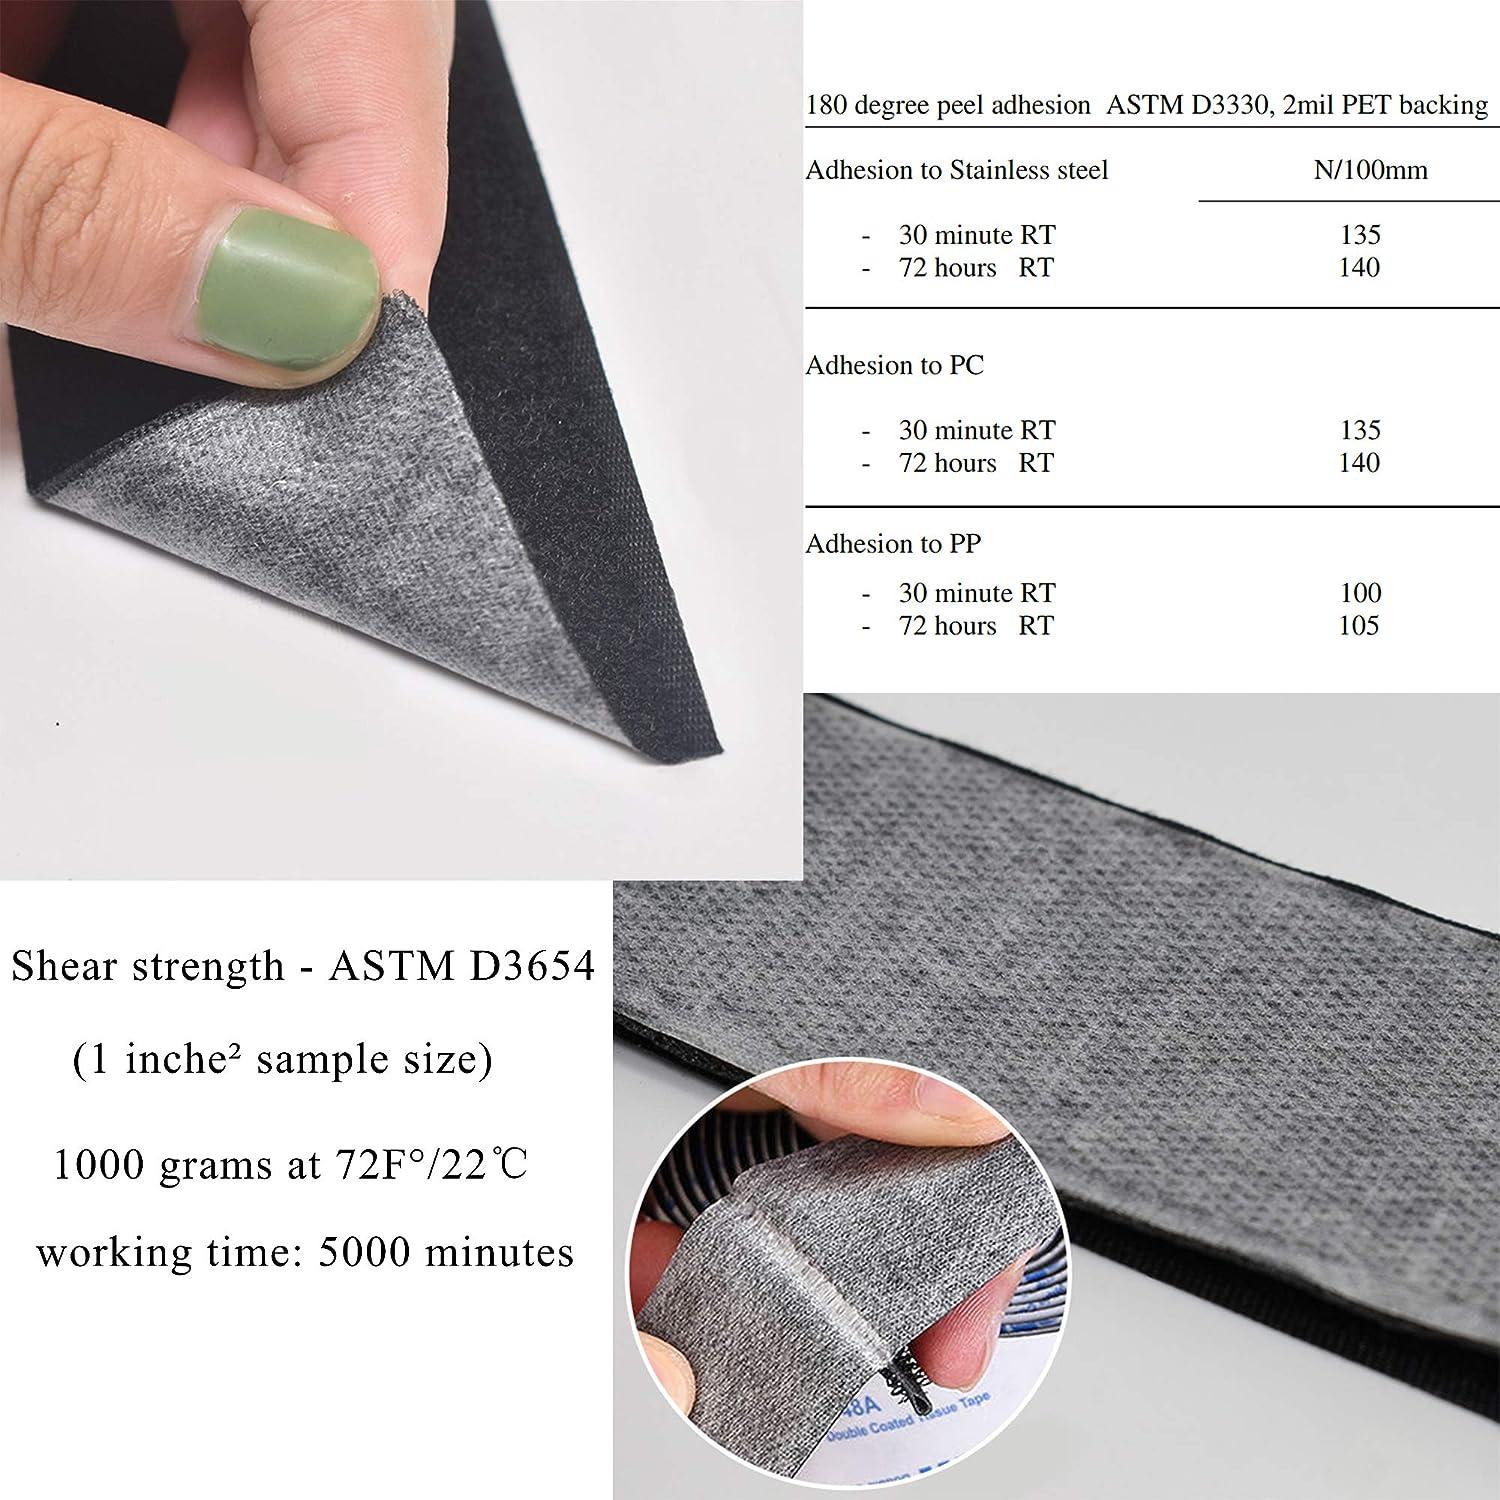 Best Fabric Interlocking Tape for Mounting and Fastening Materials